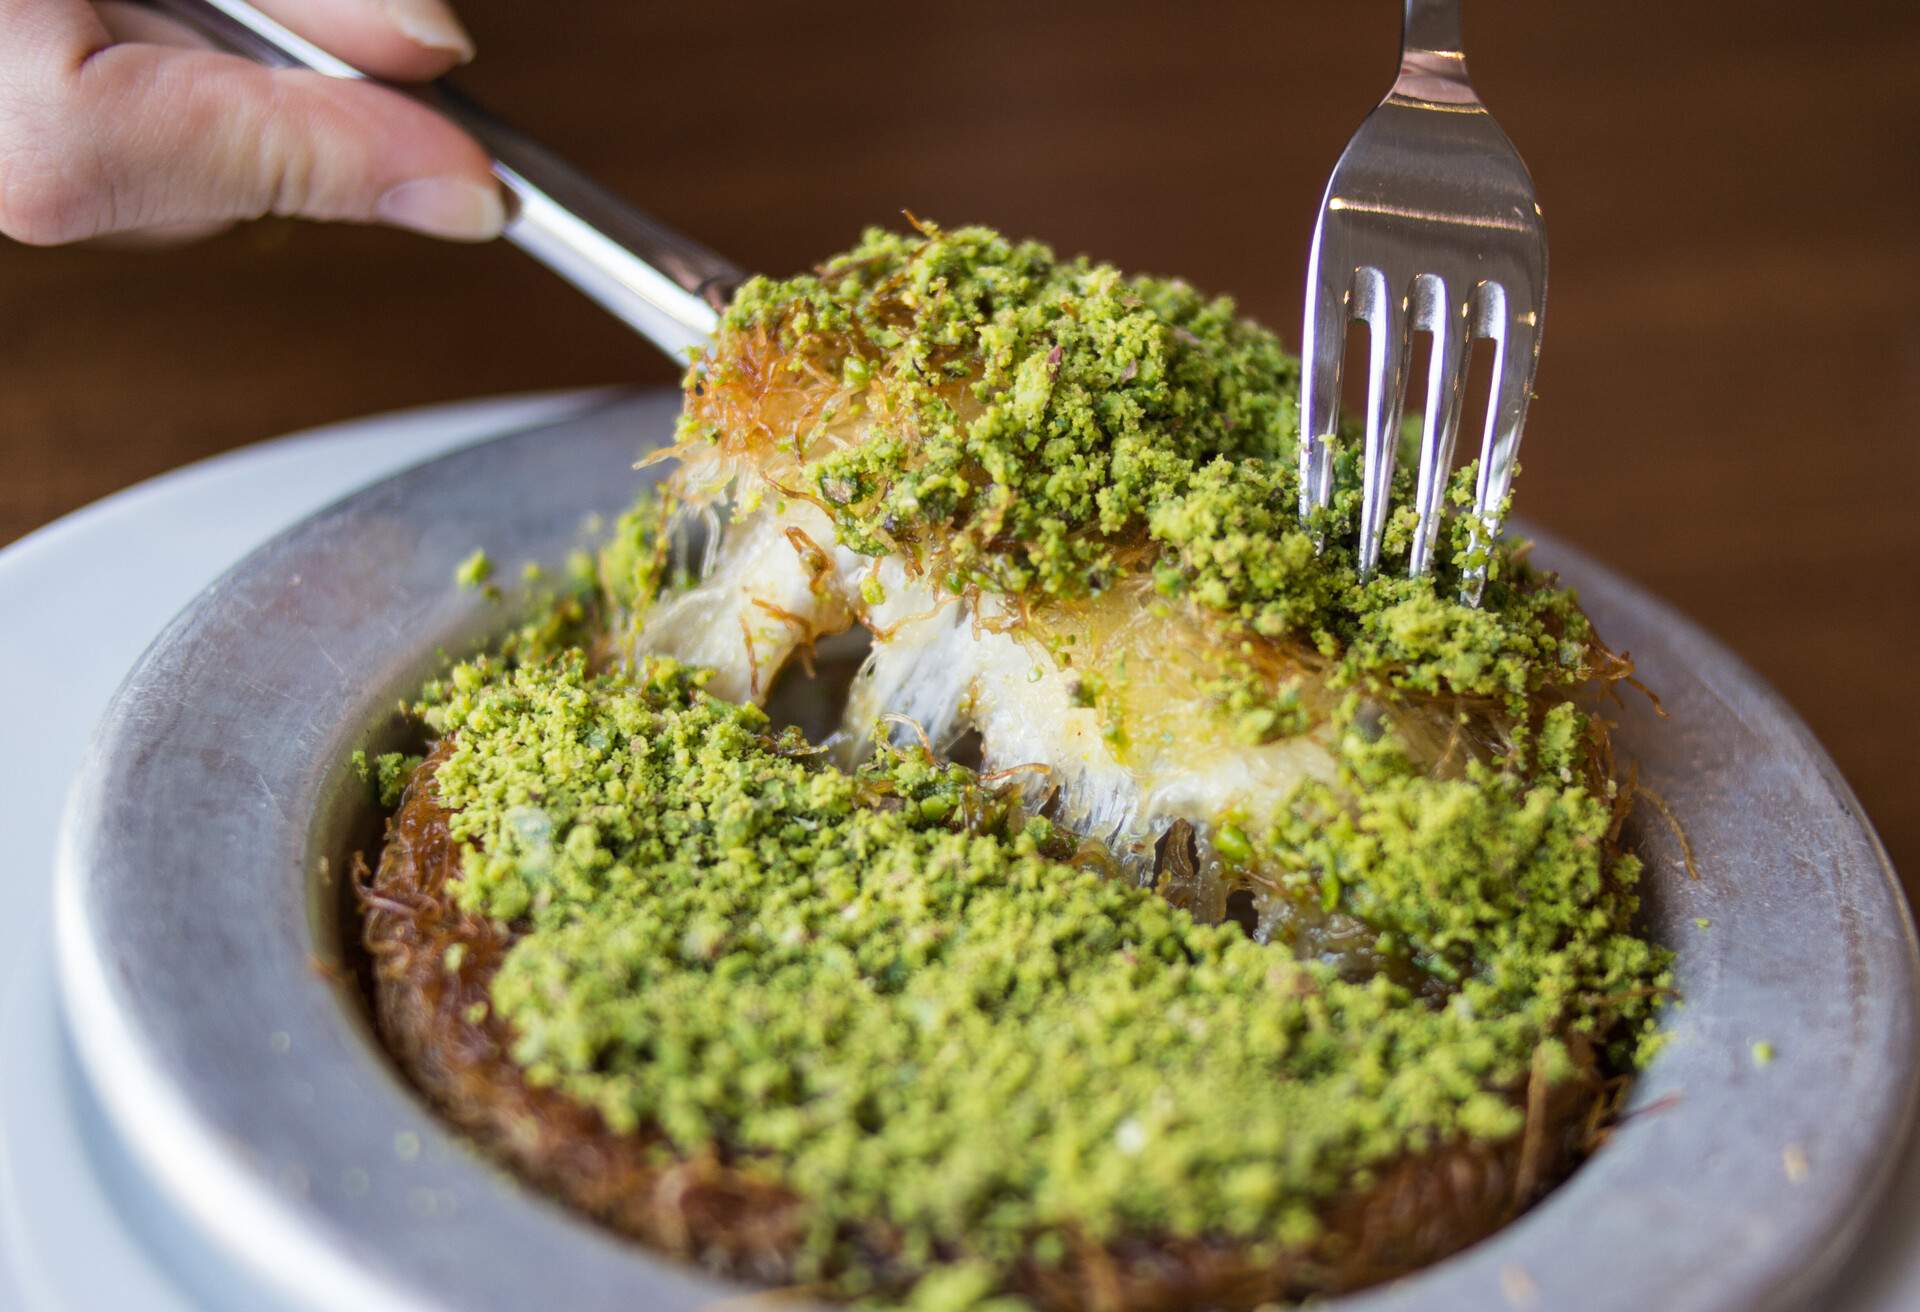 Kunefe / Turkish Traditional Dessert. Spelled kunafeh or kunafah is a cheese pastry soaked in sweet, sugar-based syrup, typical of the regions belonging to the former Ottoman Empire.